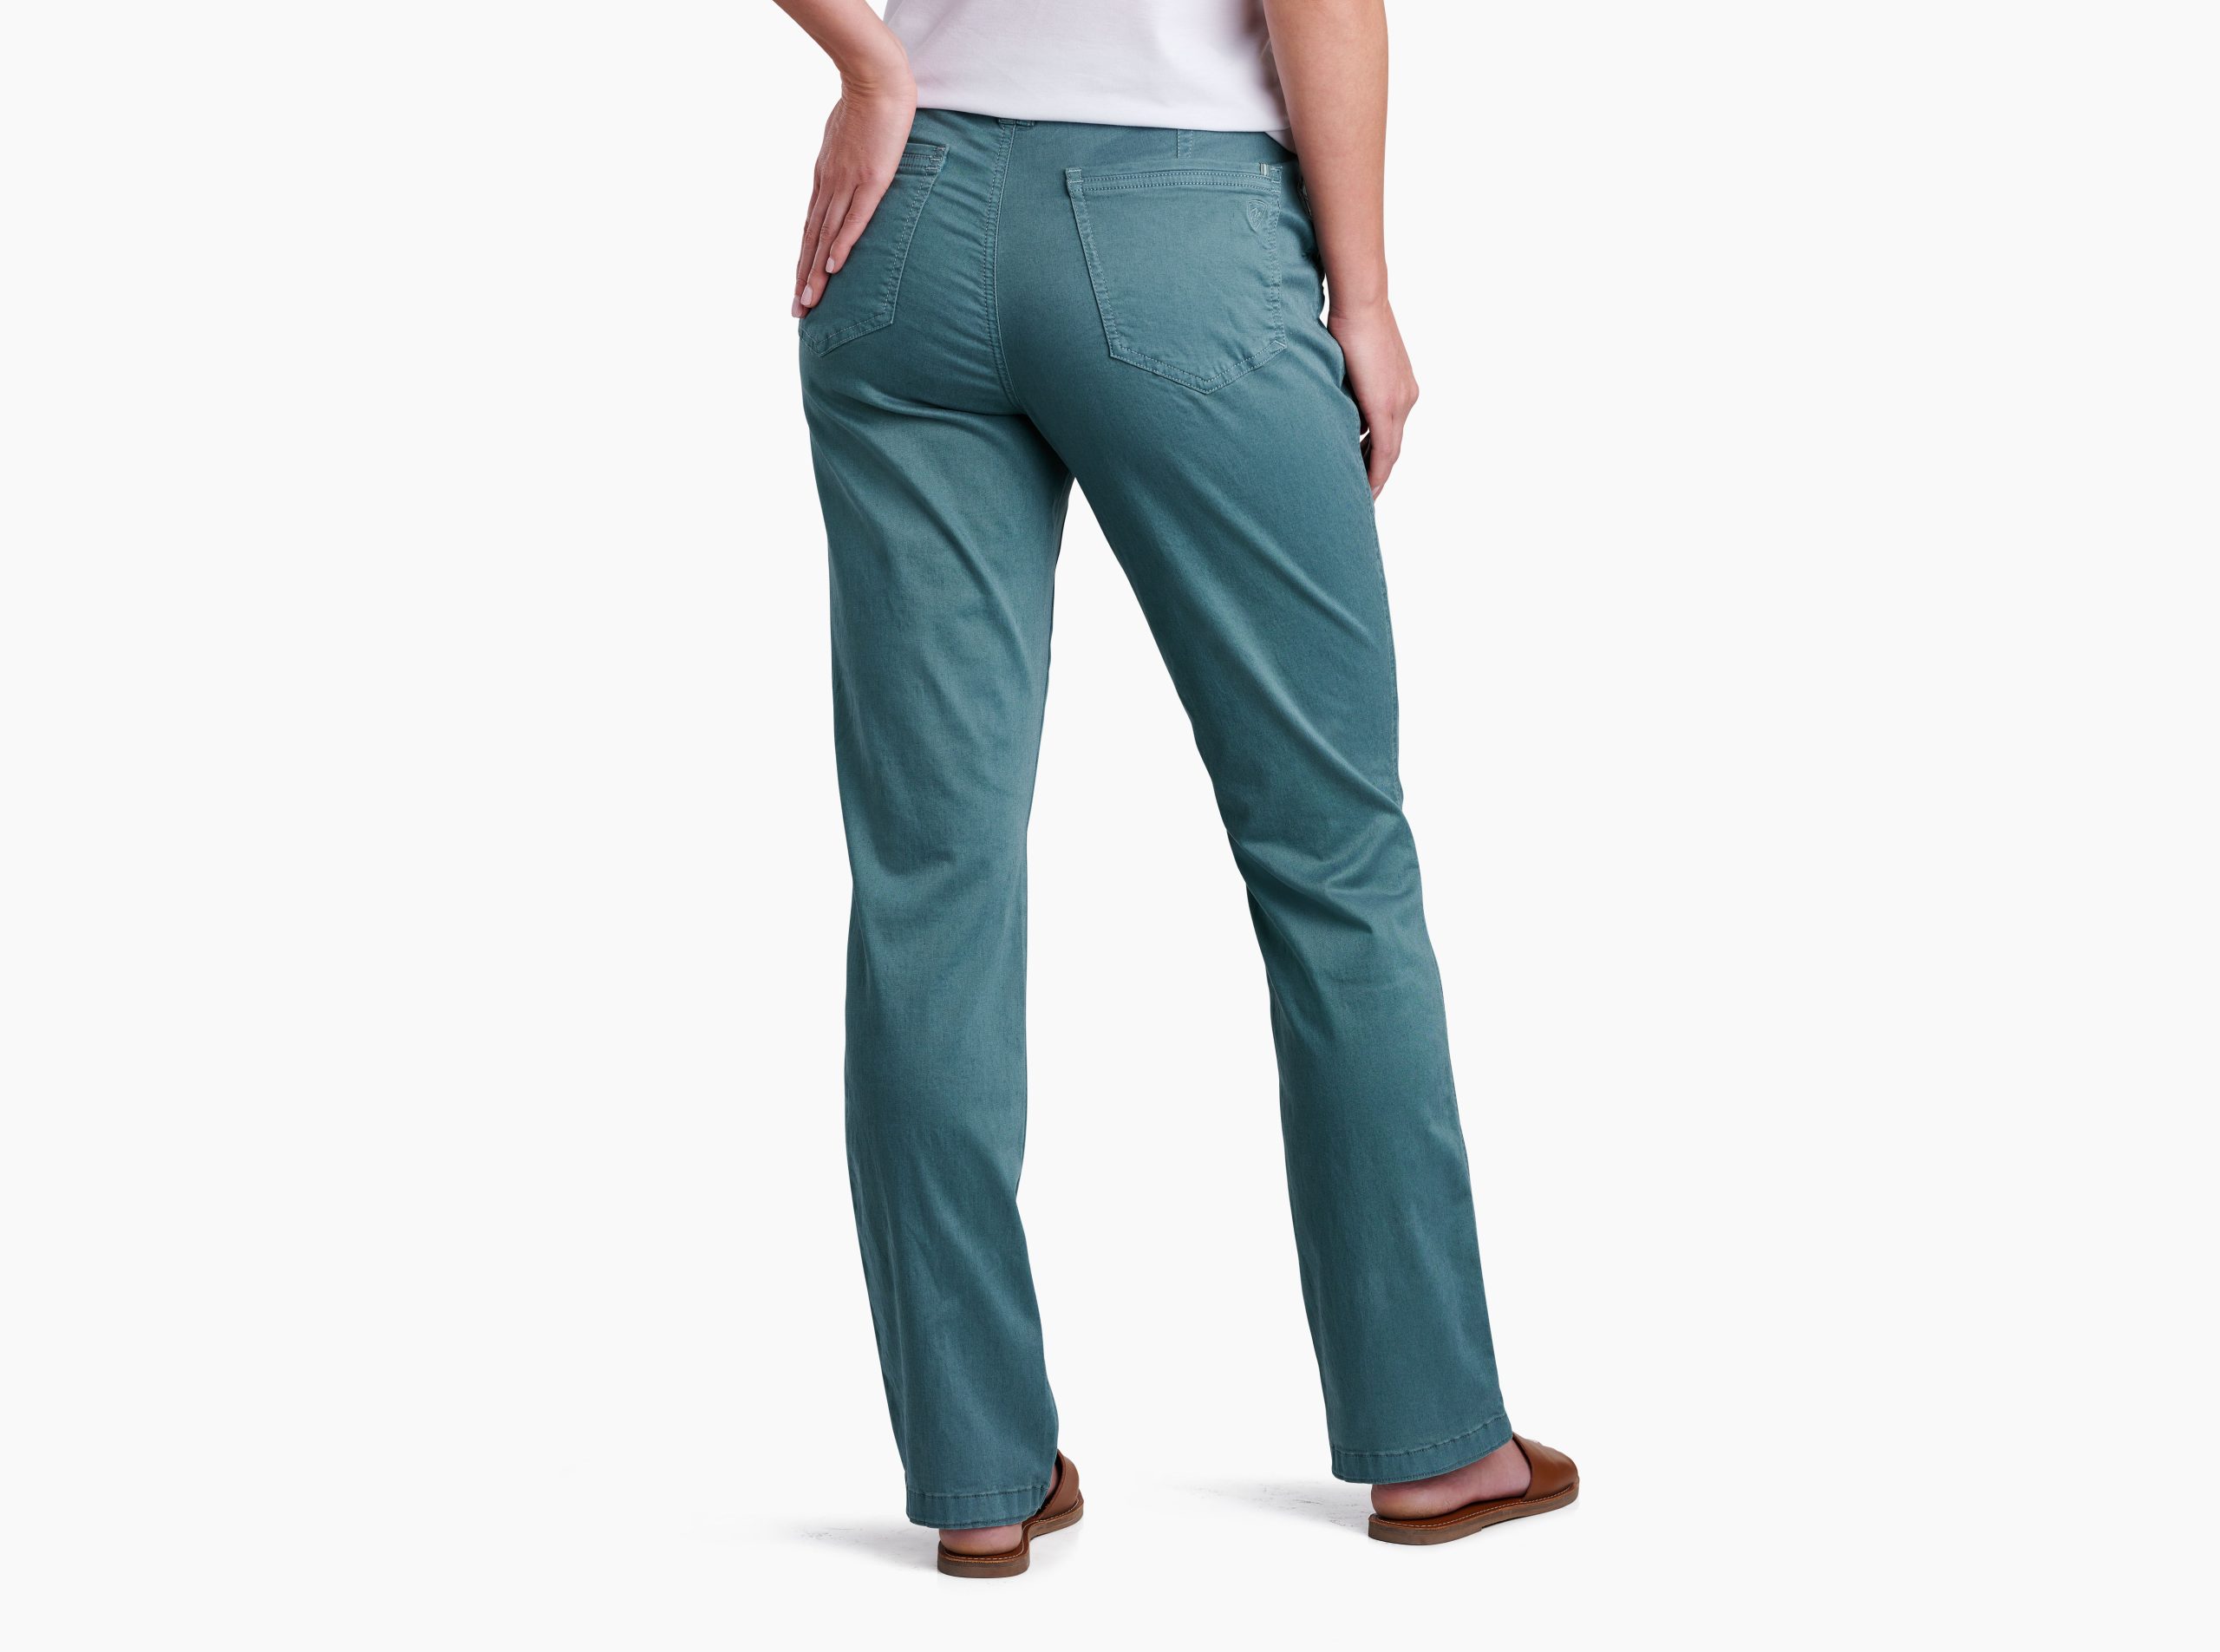 Kuhl pants women: Discover the Ultimate Comfort and Style插图4